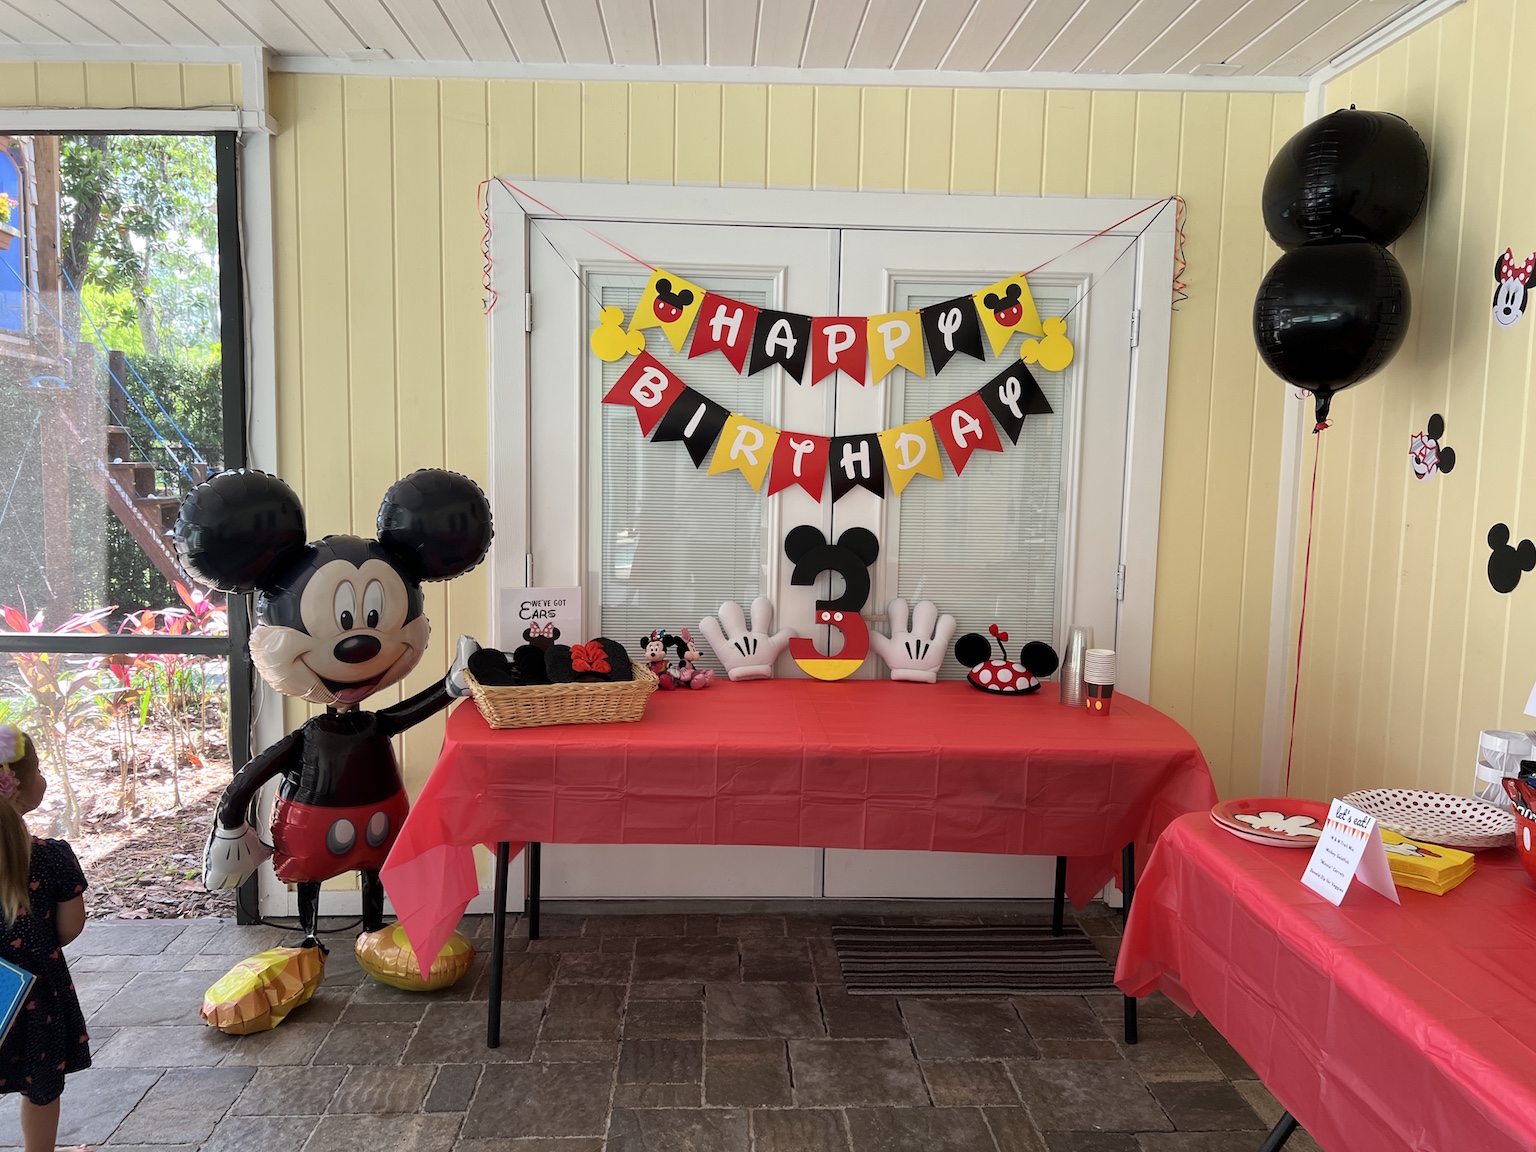 Magical "Mickey & Minnie Mouse" Birthday Party Ideas - the thinking closet